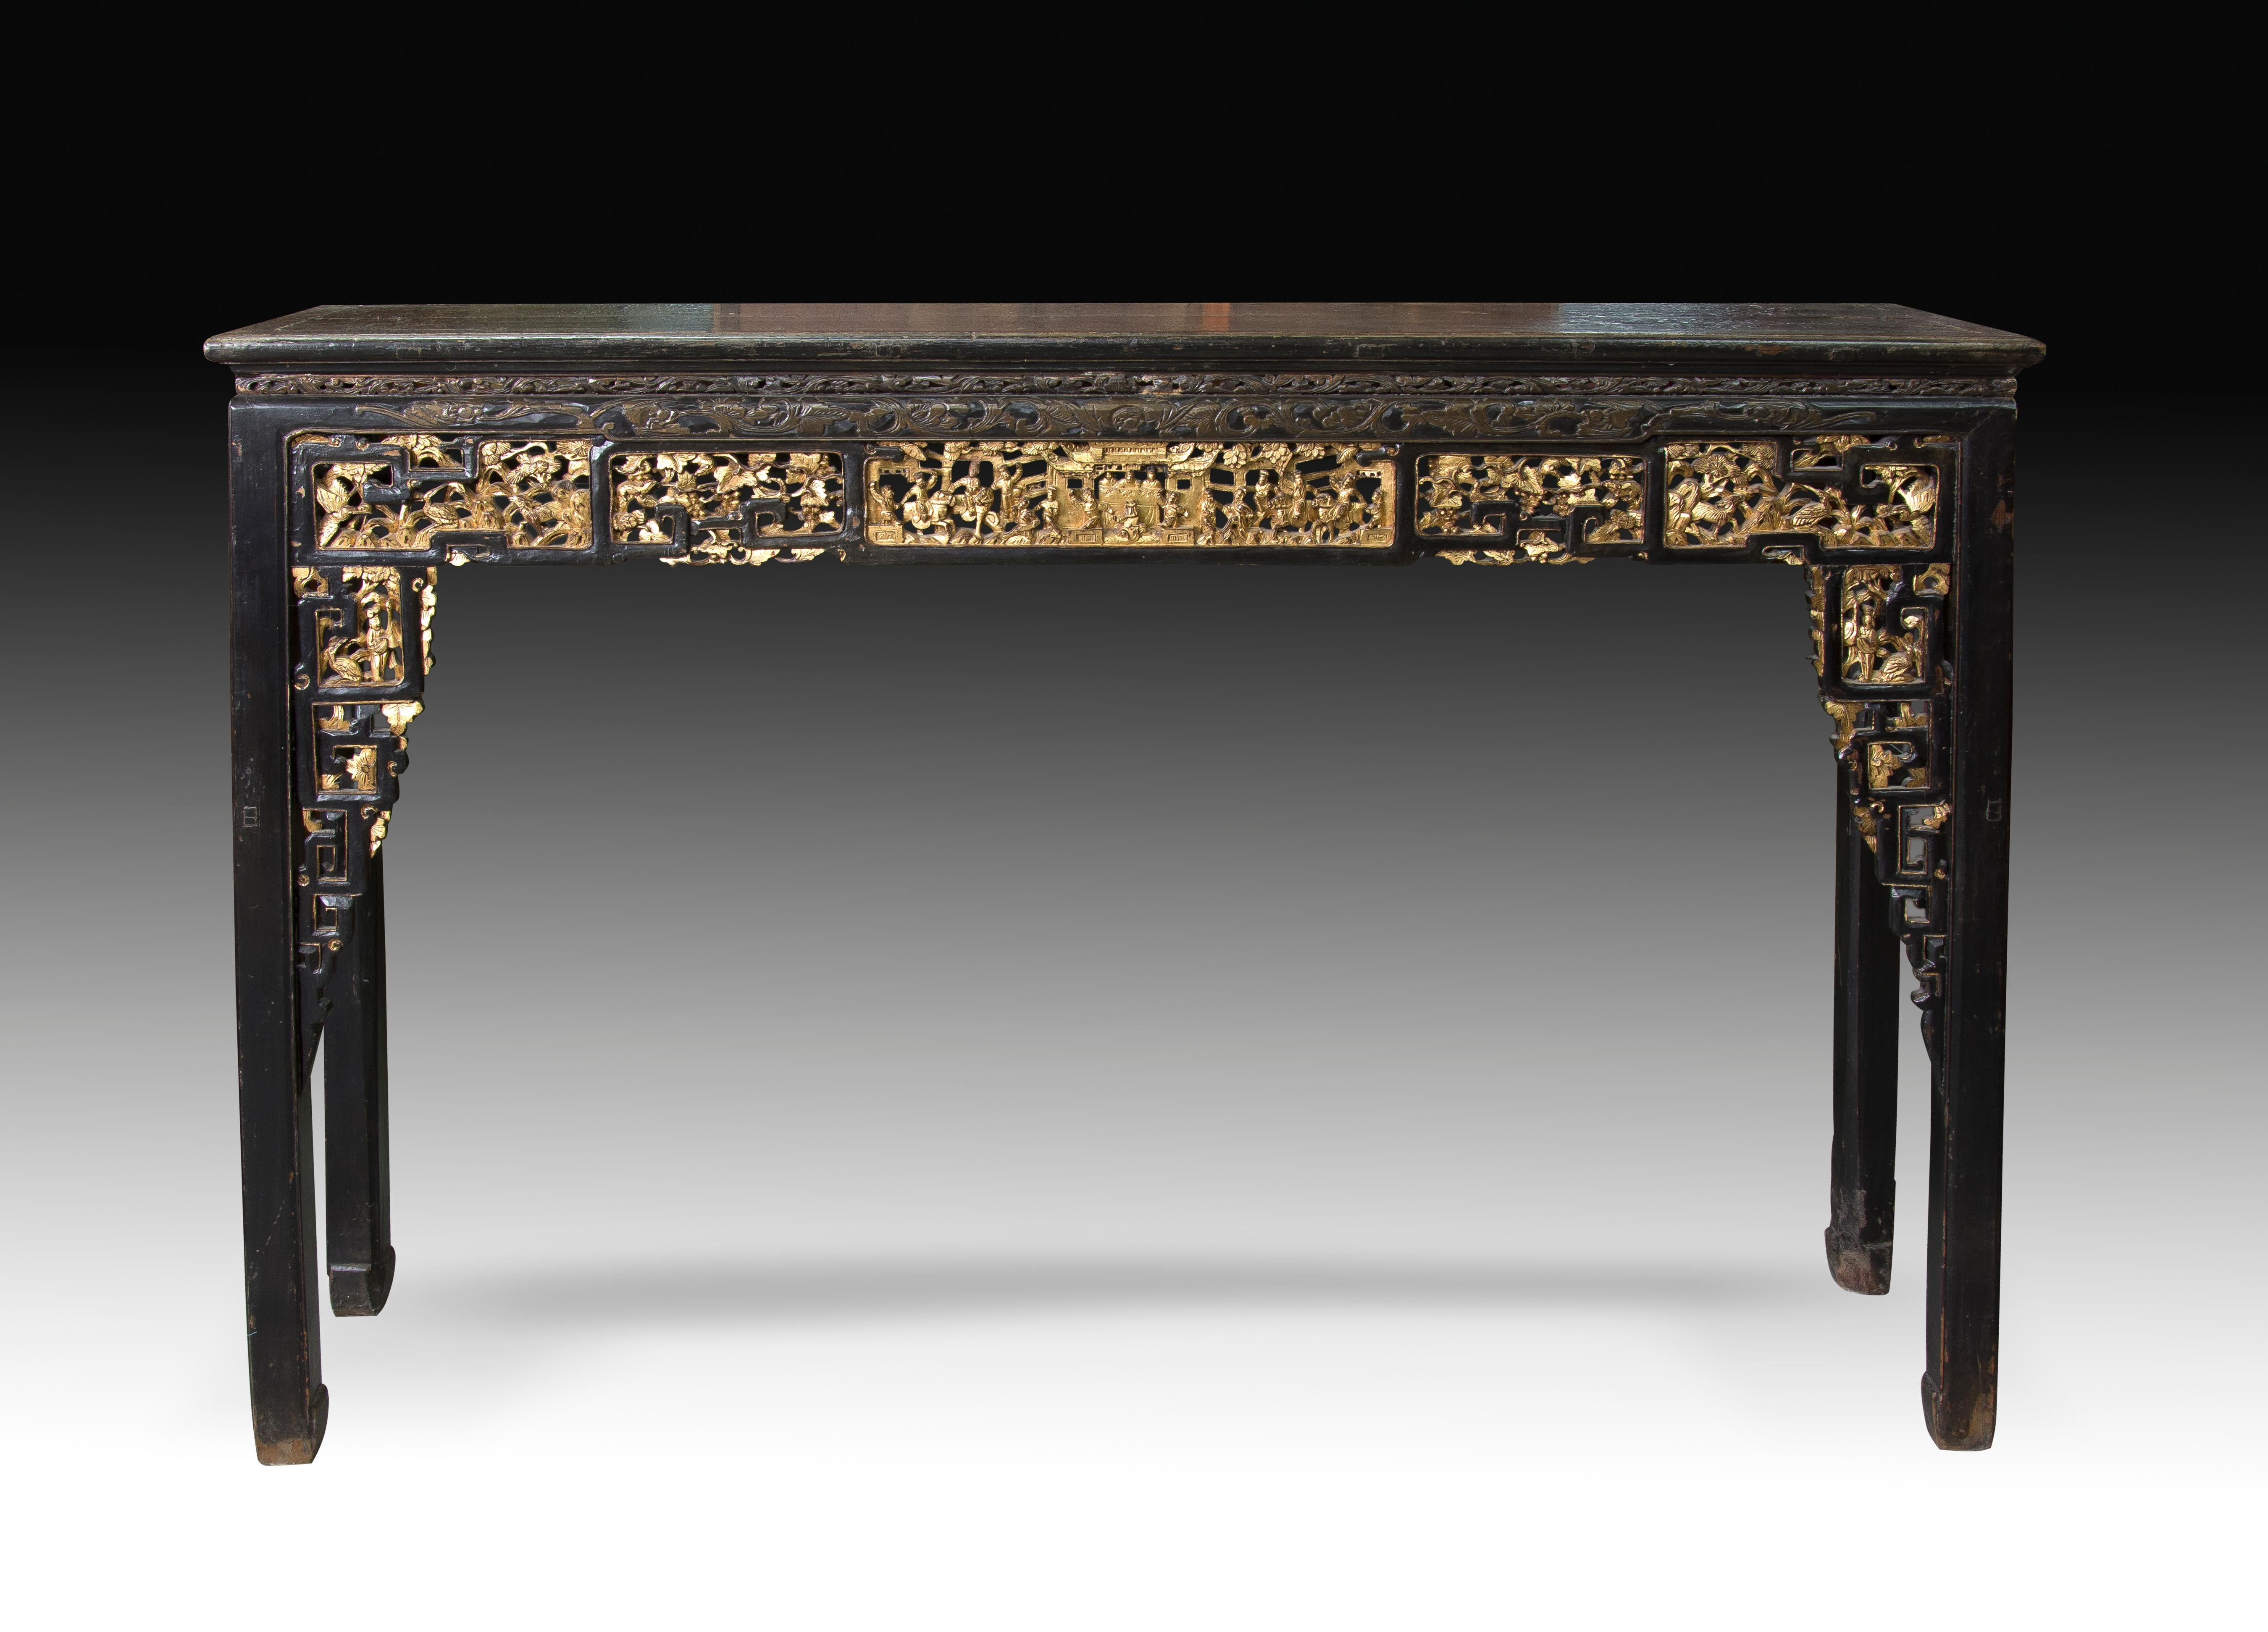 19th Century Oriental Table, Wood, Possibly China, 19th-20th Century